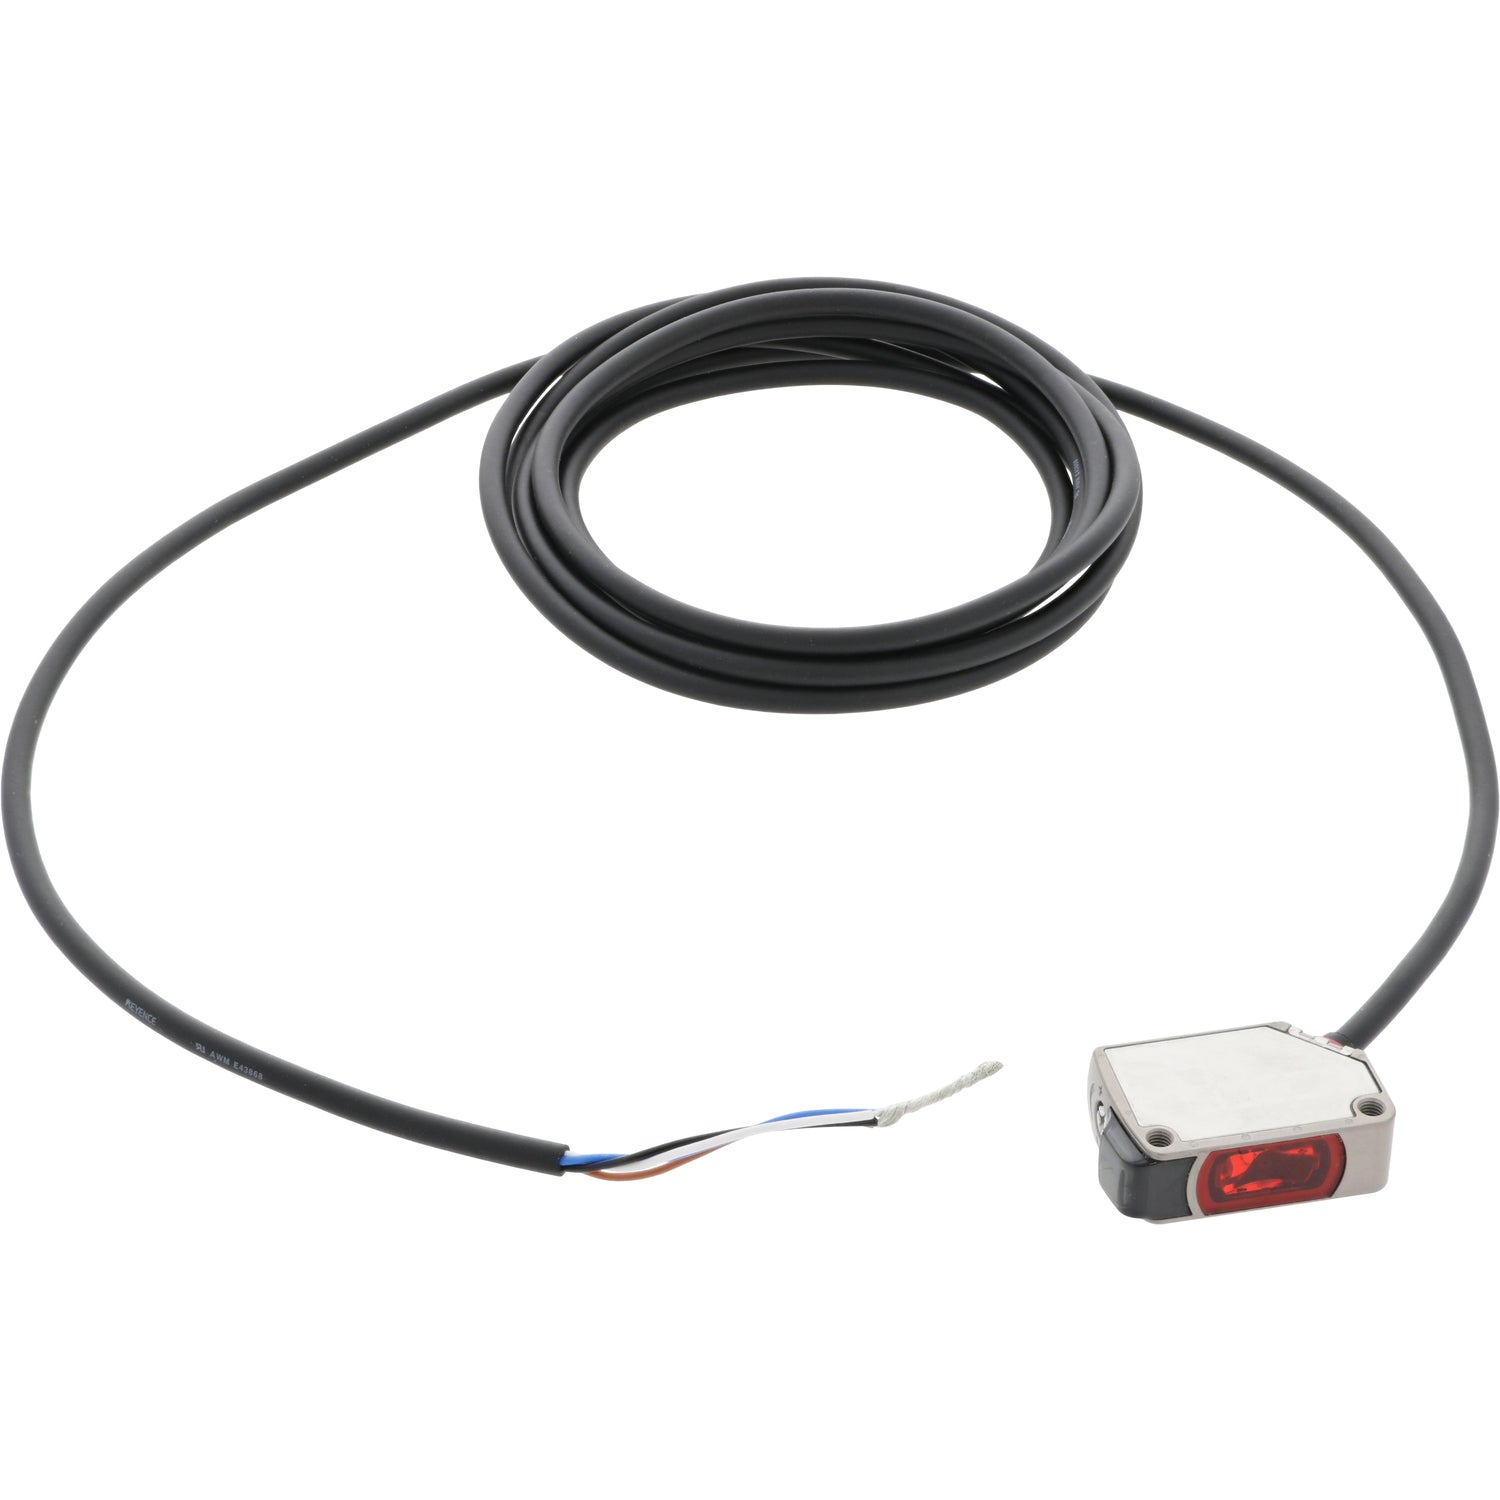 Coiled black sensor cable with four exposed wires on one end and a grey, rectangular, reflection sensor on the other end. Shown on white background. PR-G51P